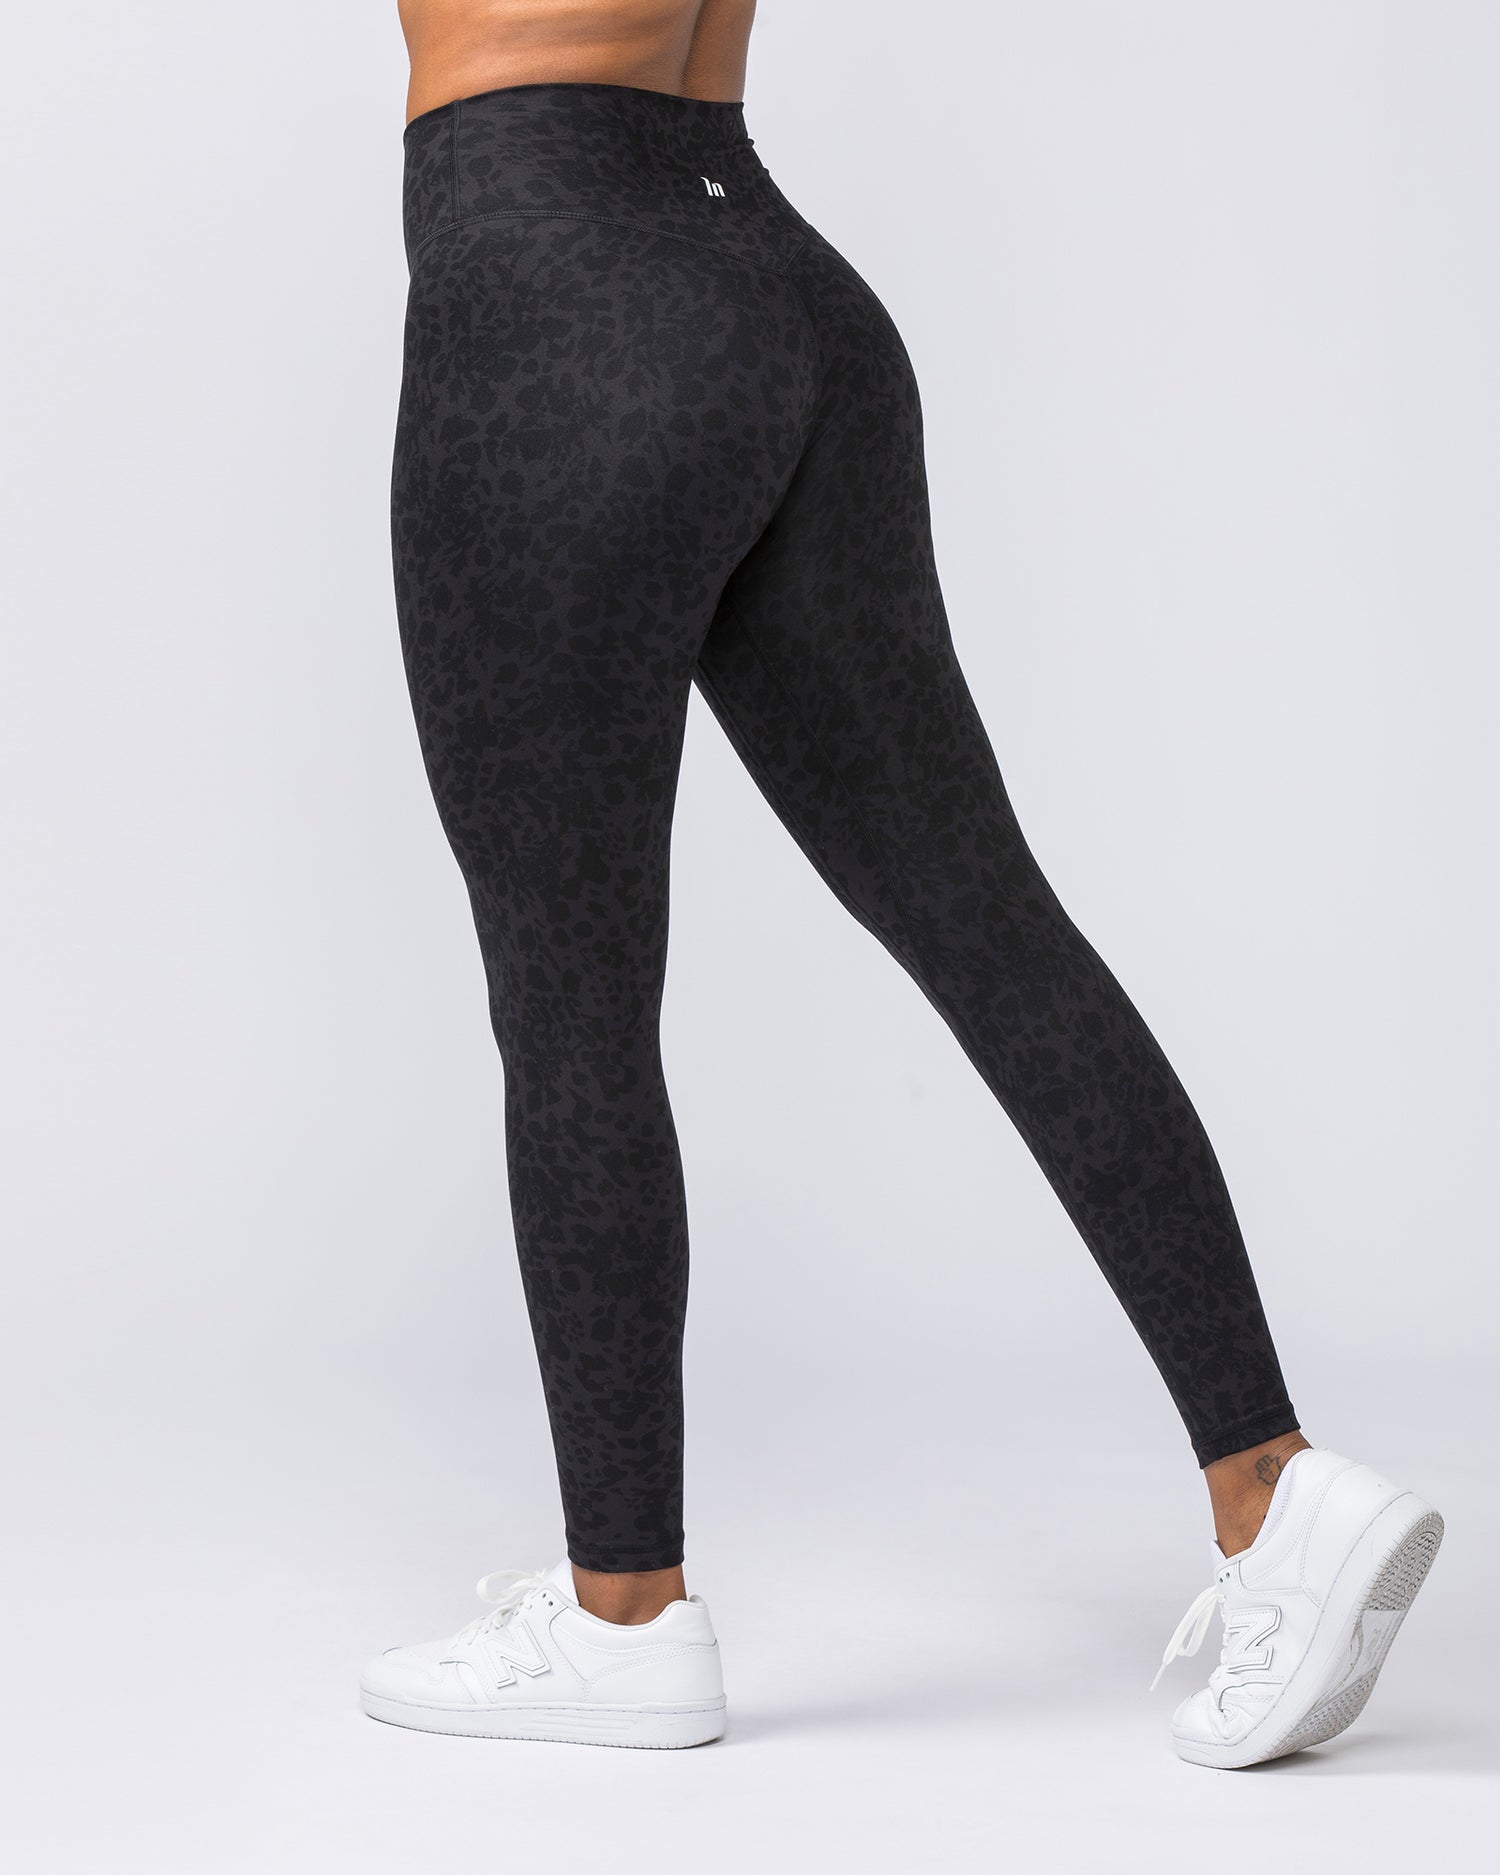 Zero Rise Everyday Ankle Length Leggings - Monochrome Abstract